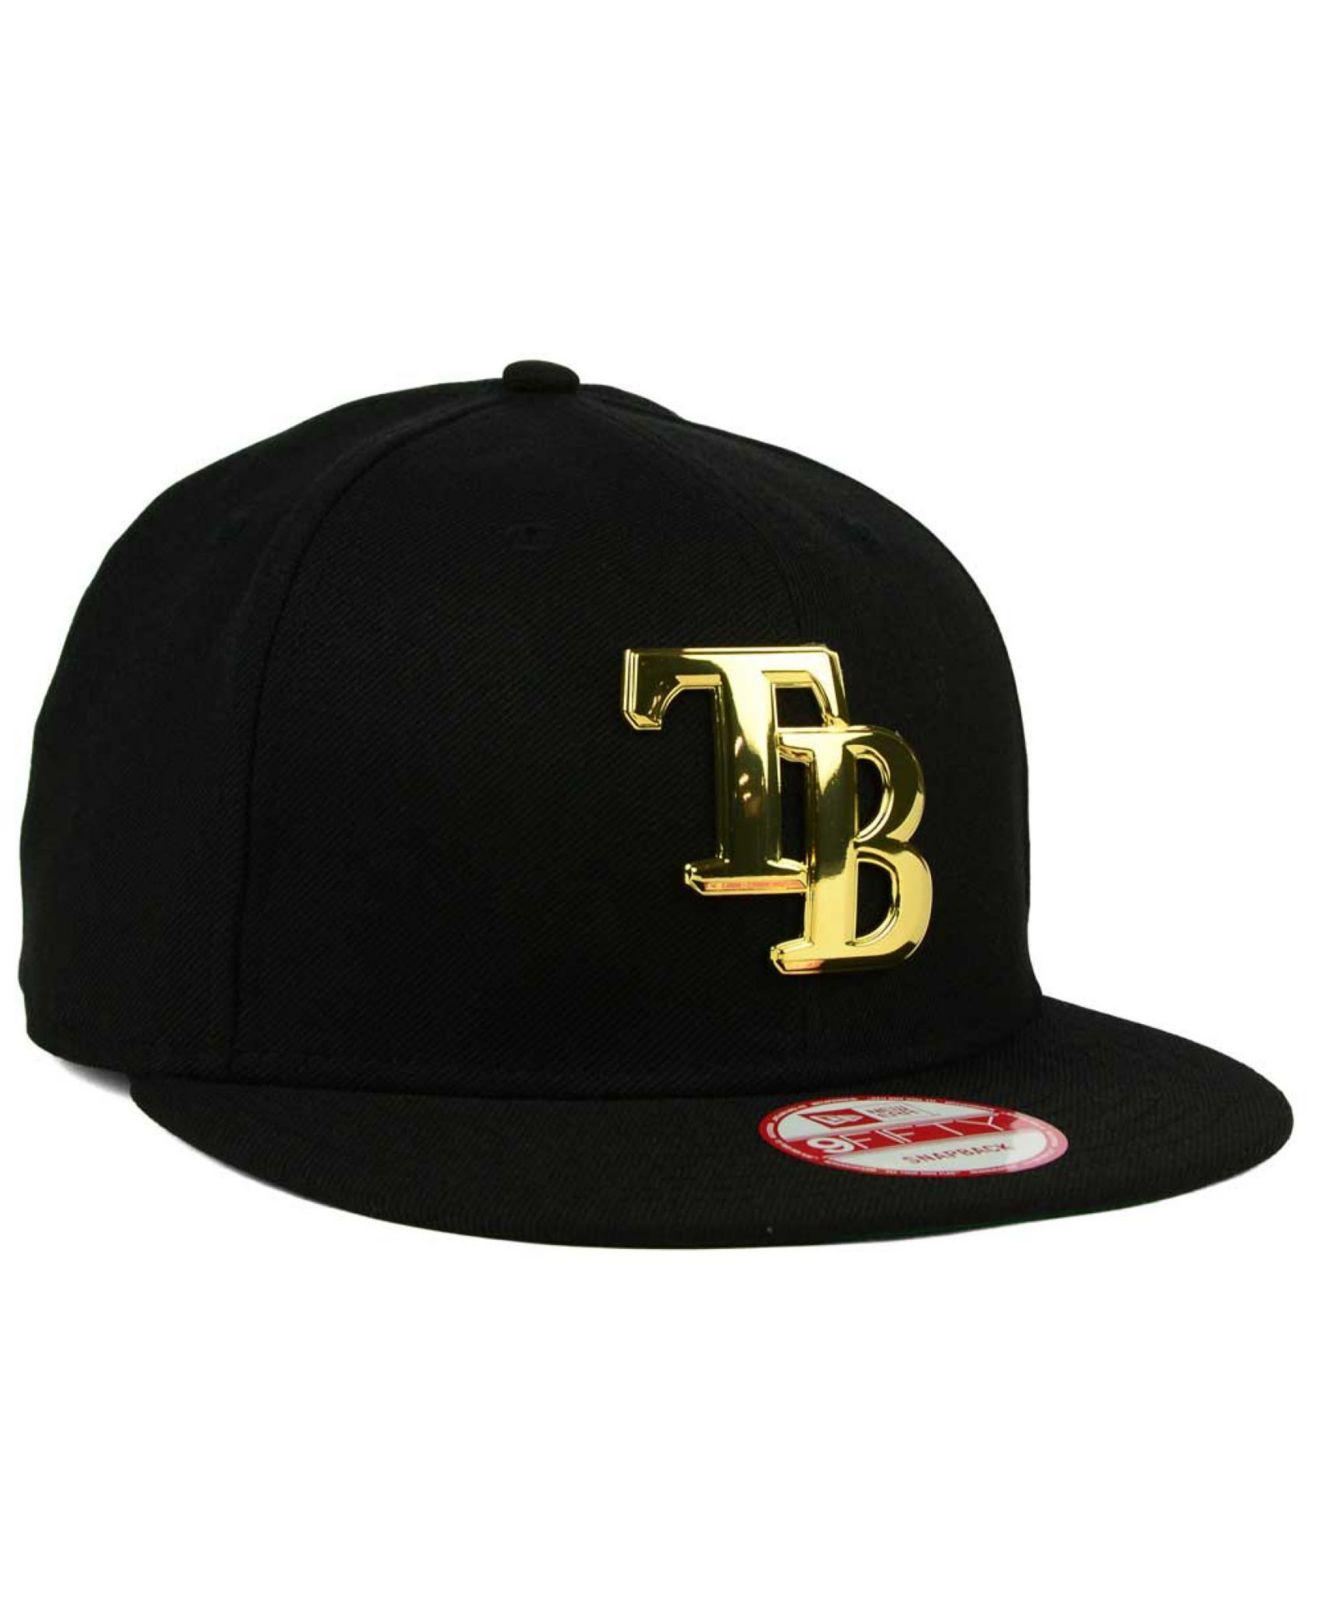 KTZ Tampa Bay Rays League O'gold 9fifty Snapback Cap in Black for Men ...